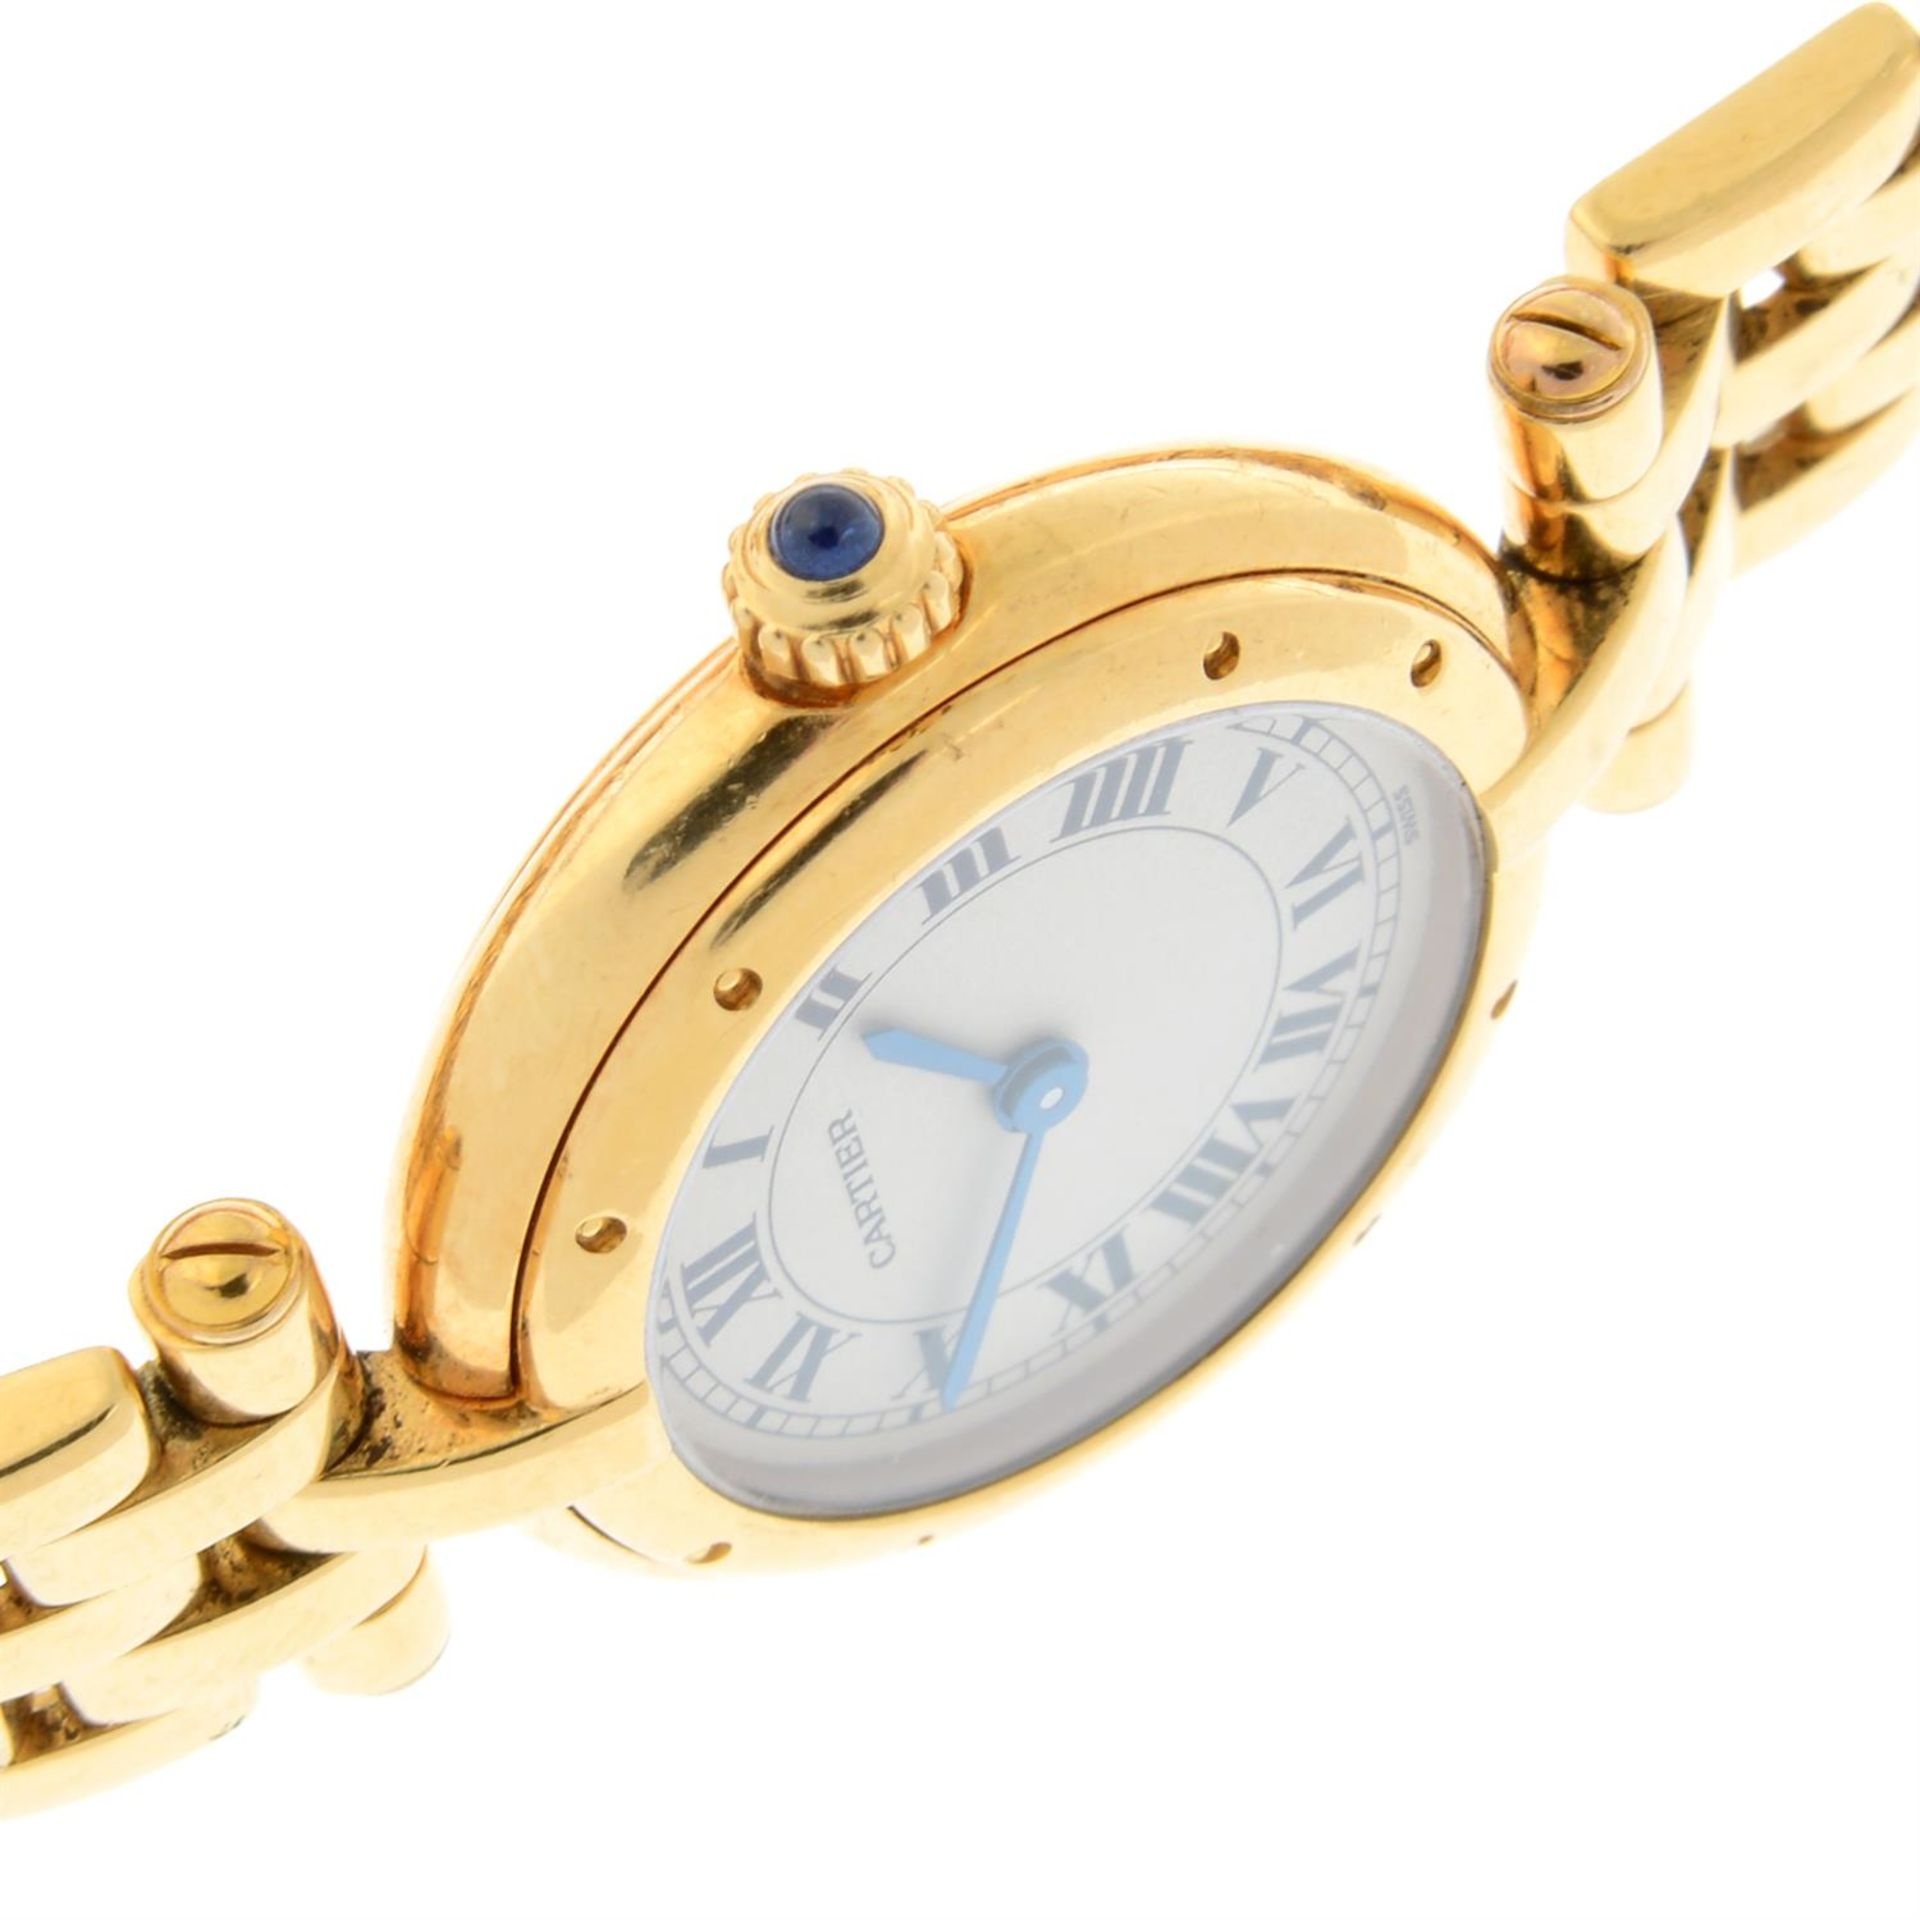 CARTIER - an 18ct yellow gold Panthere Vendome bracelet watch, 24mm. - Image 3 of 5